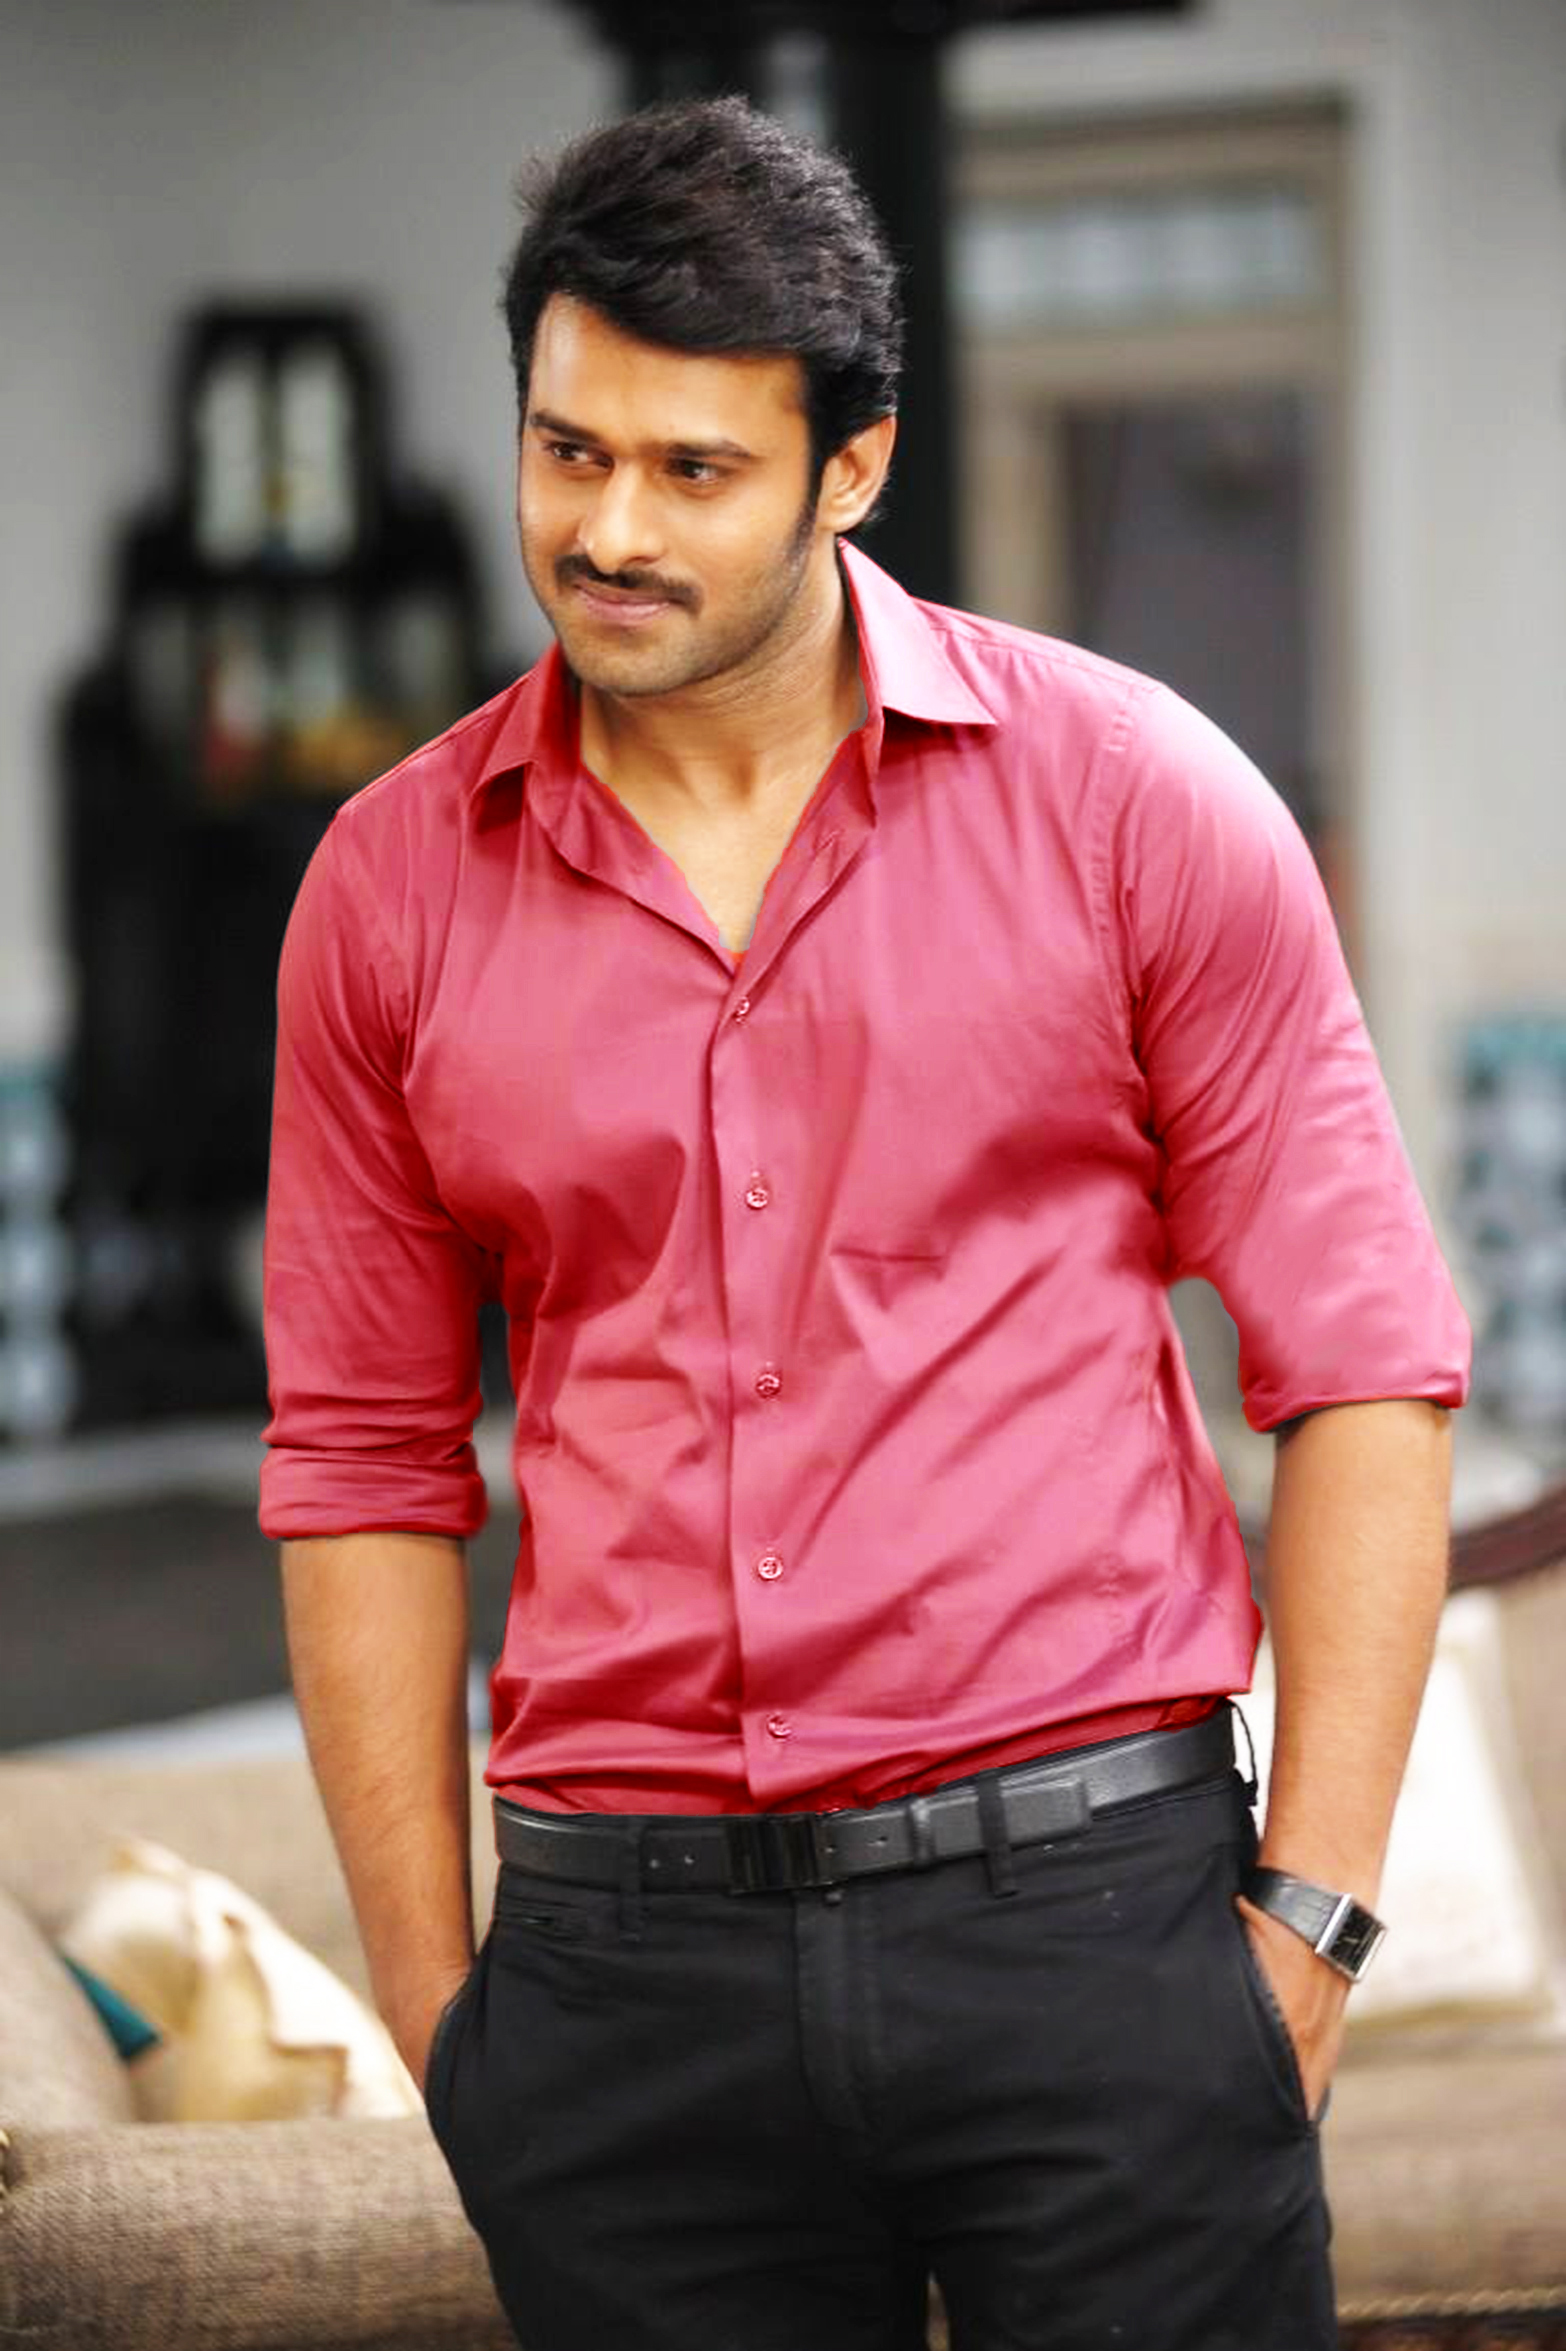 Prabhas Mirchi In Red Shirt Look by Sumanth0019 on DeviantArt